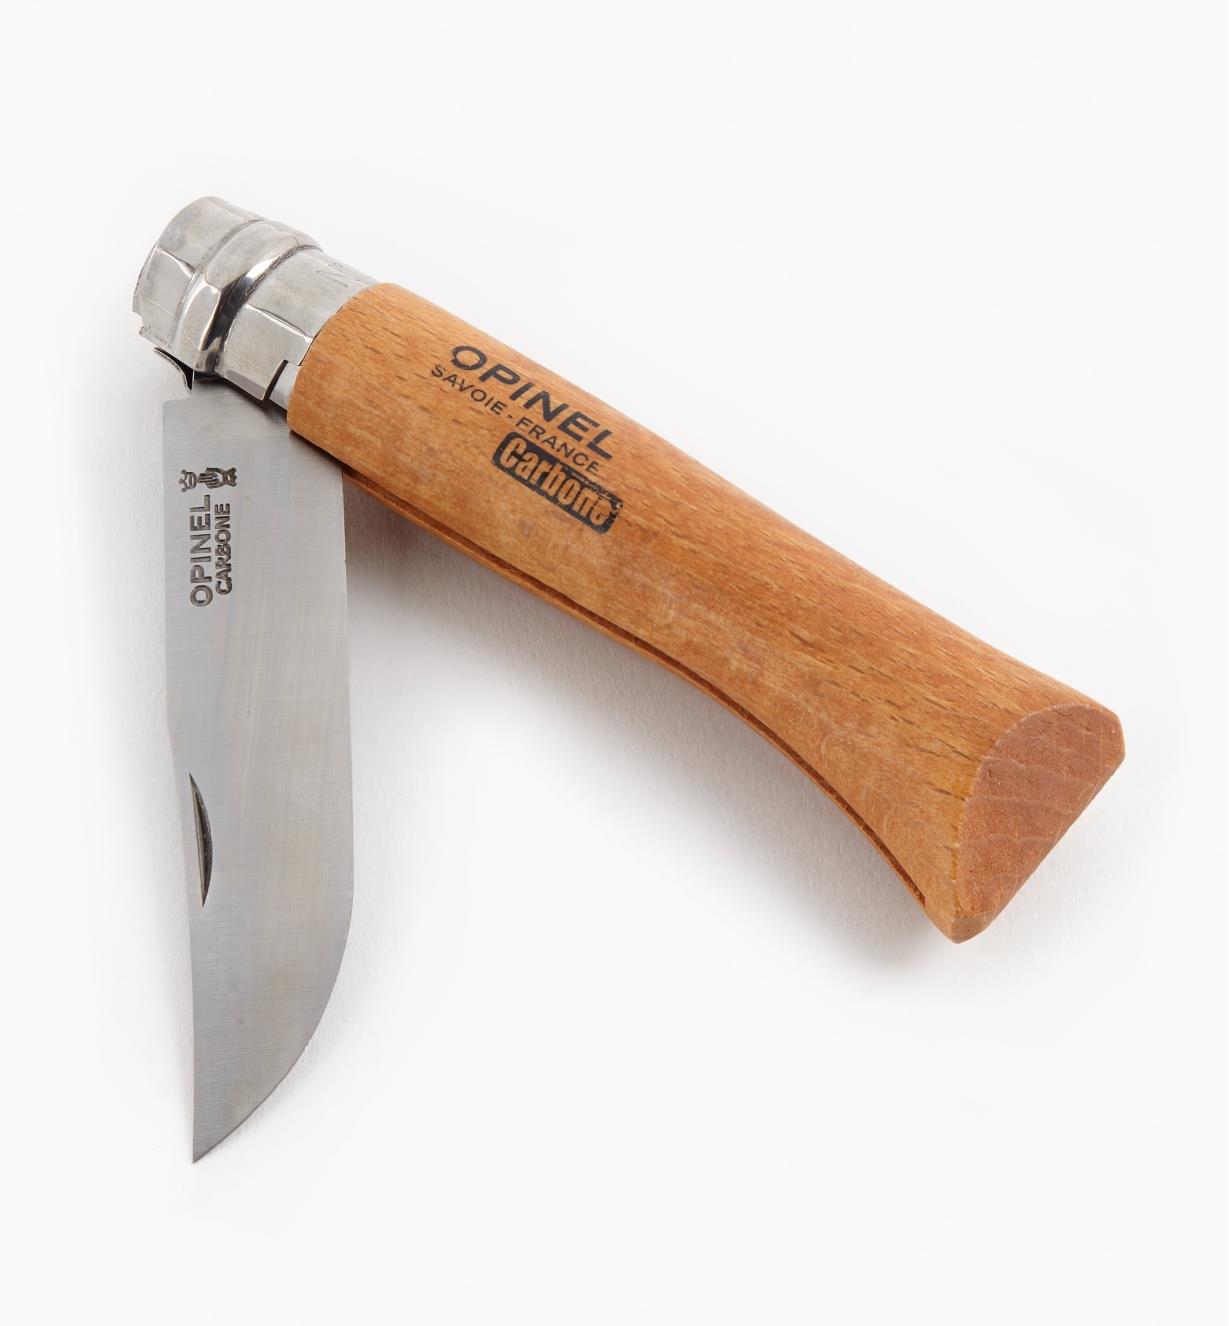 61K8003 - Couteau Opinel no 10 – 3 3/4 po